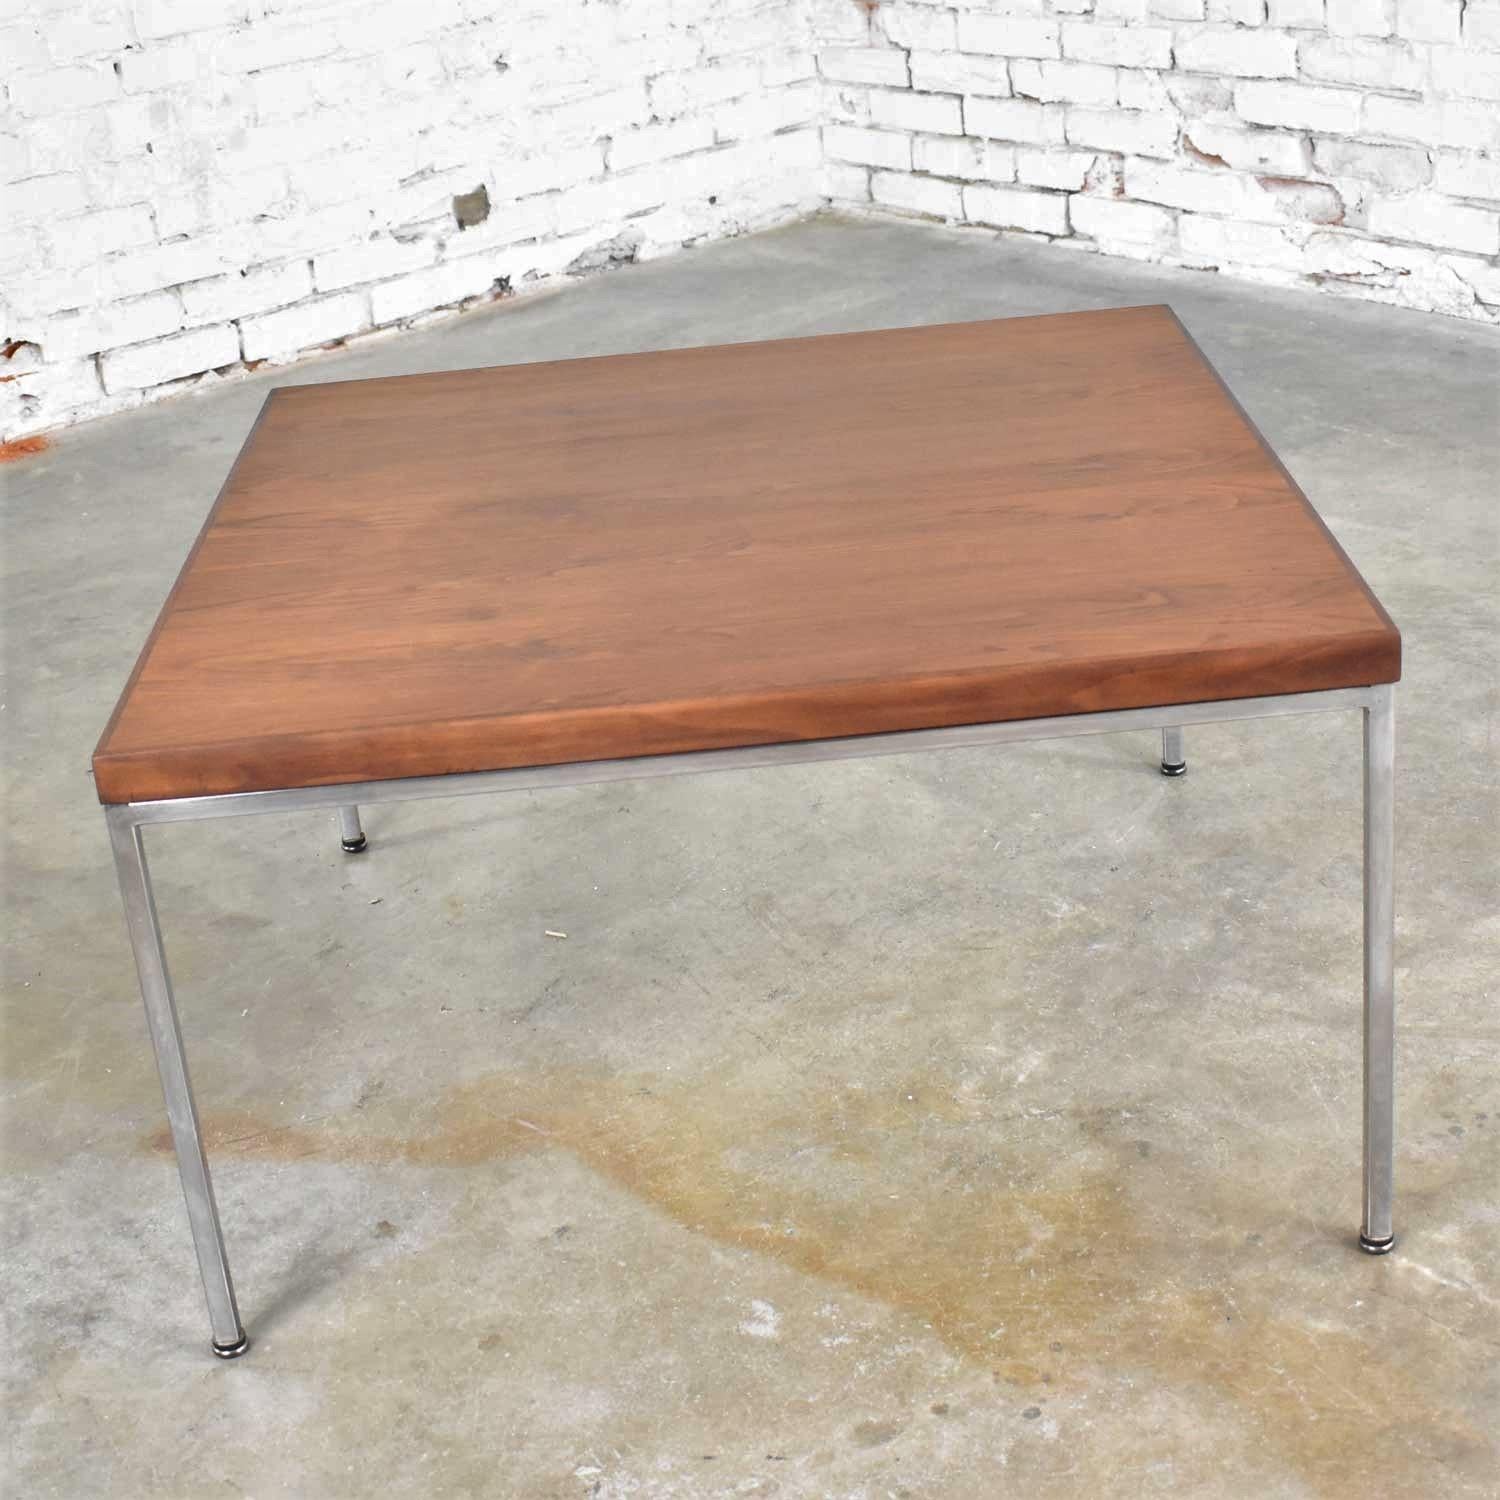 20th Century Mid-Century Modern Chrome & Walnut End or Coffee Table After Florence Knoll For Sale